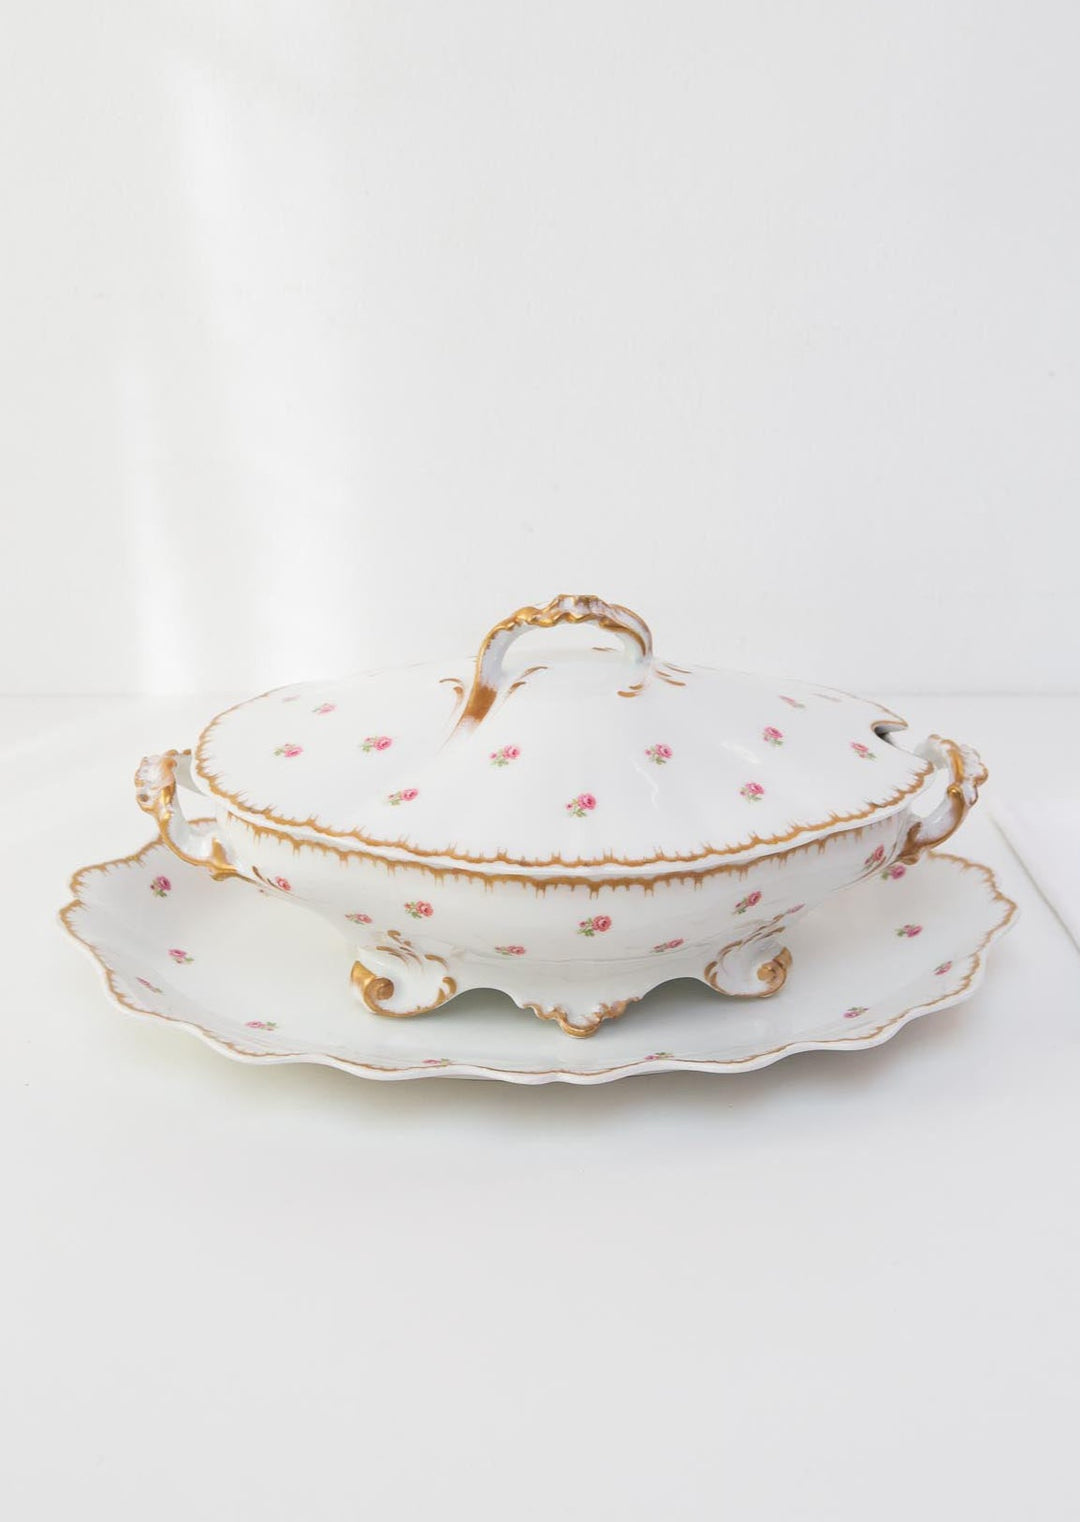 Gran sopera francesa Limoges florecillas con fuente large french tureen with plate